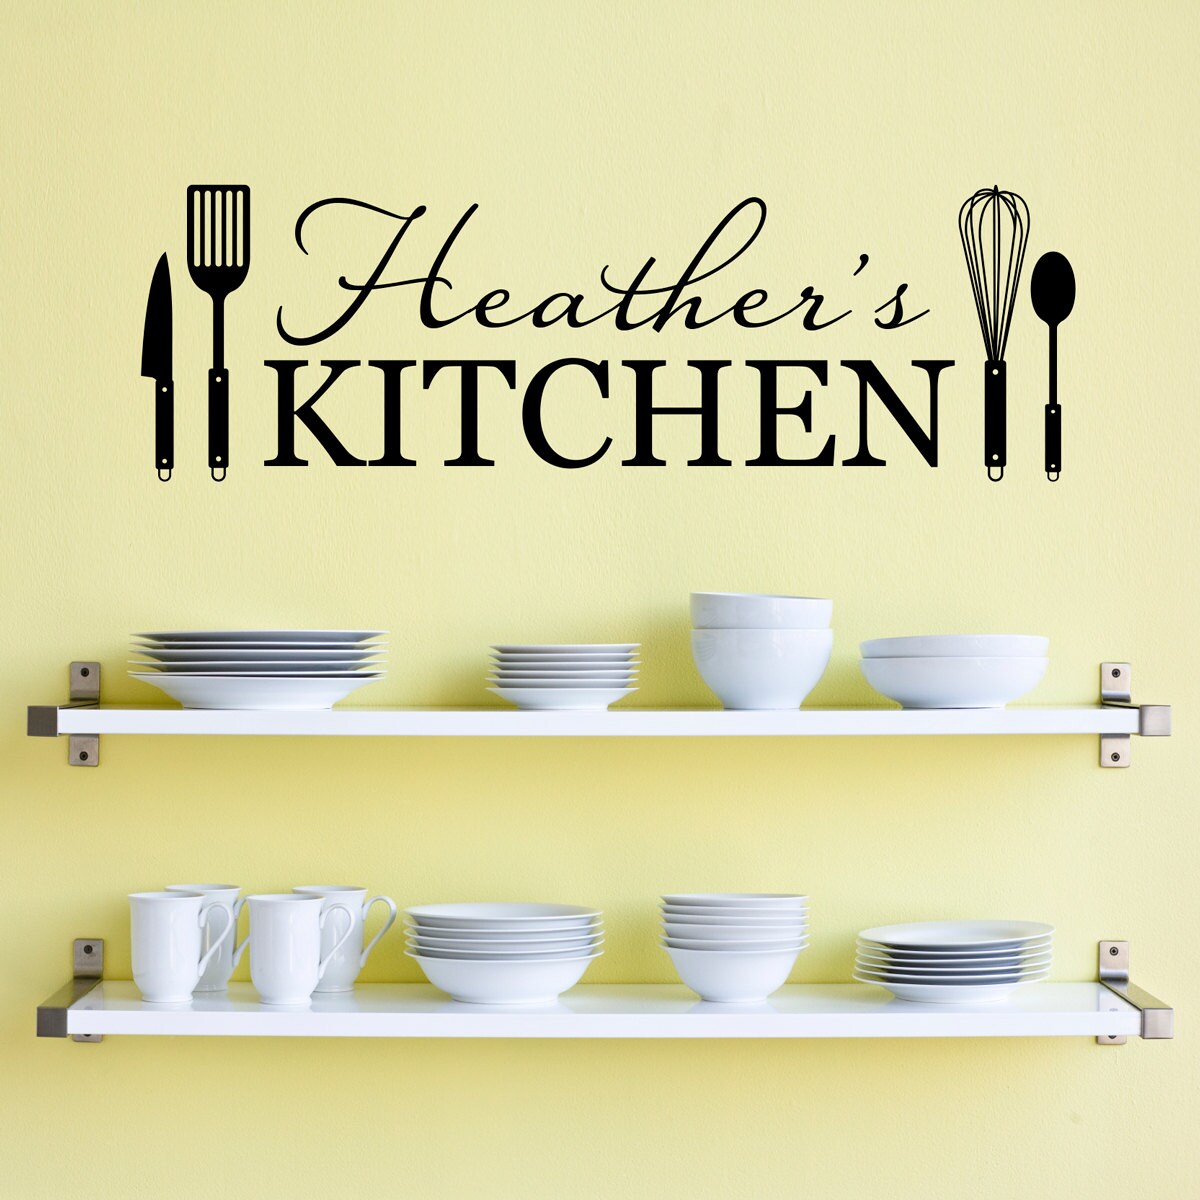 Personalized Name Kitchen Wall Decal - Kitchen Utensils Wall Art